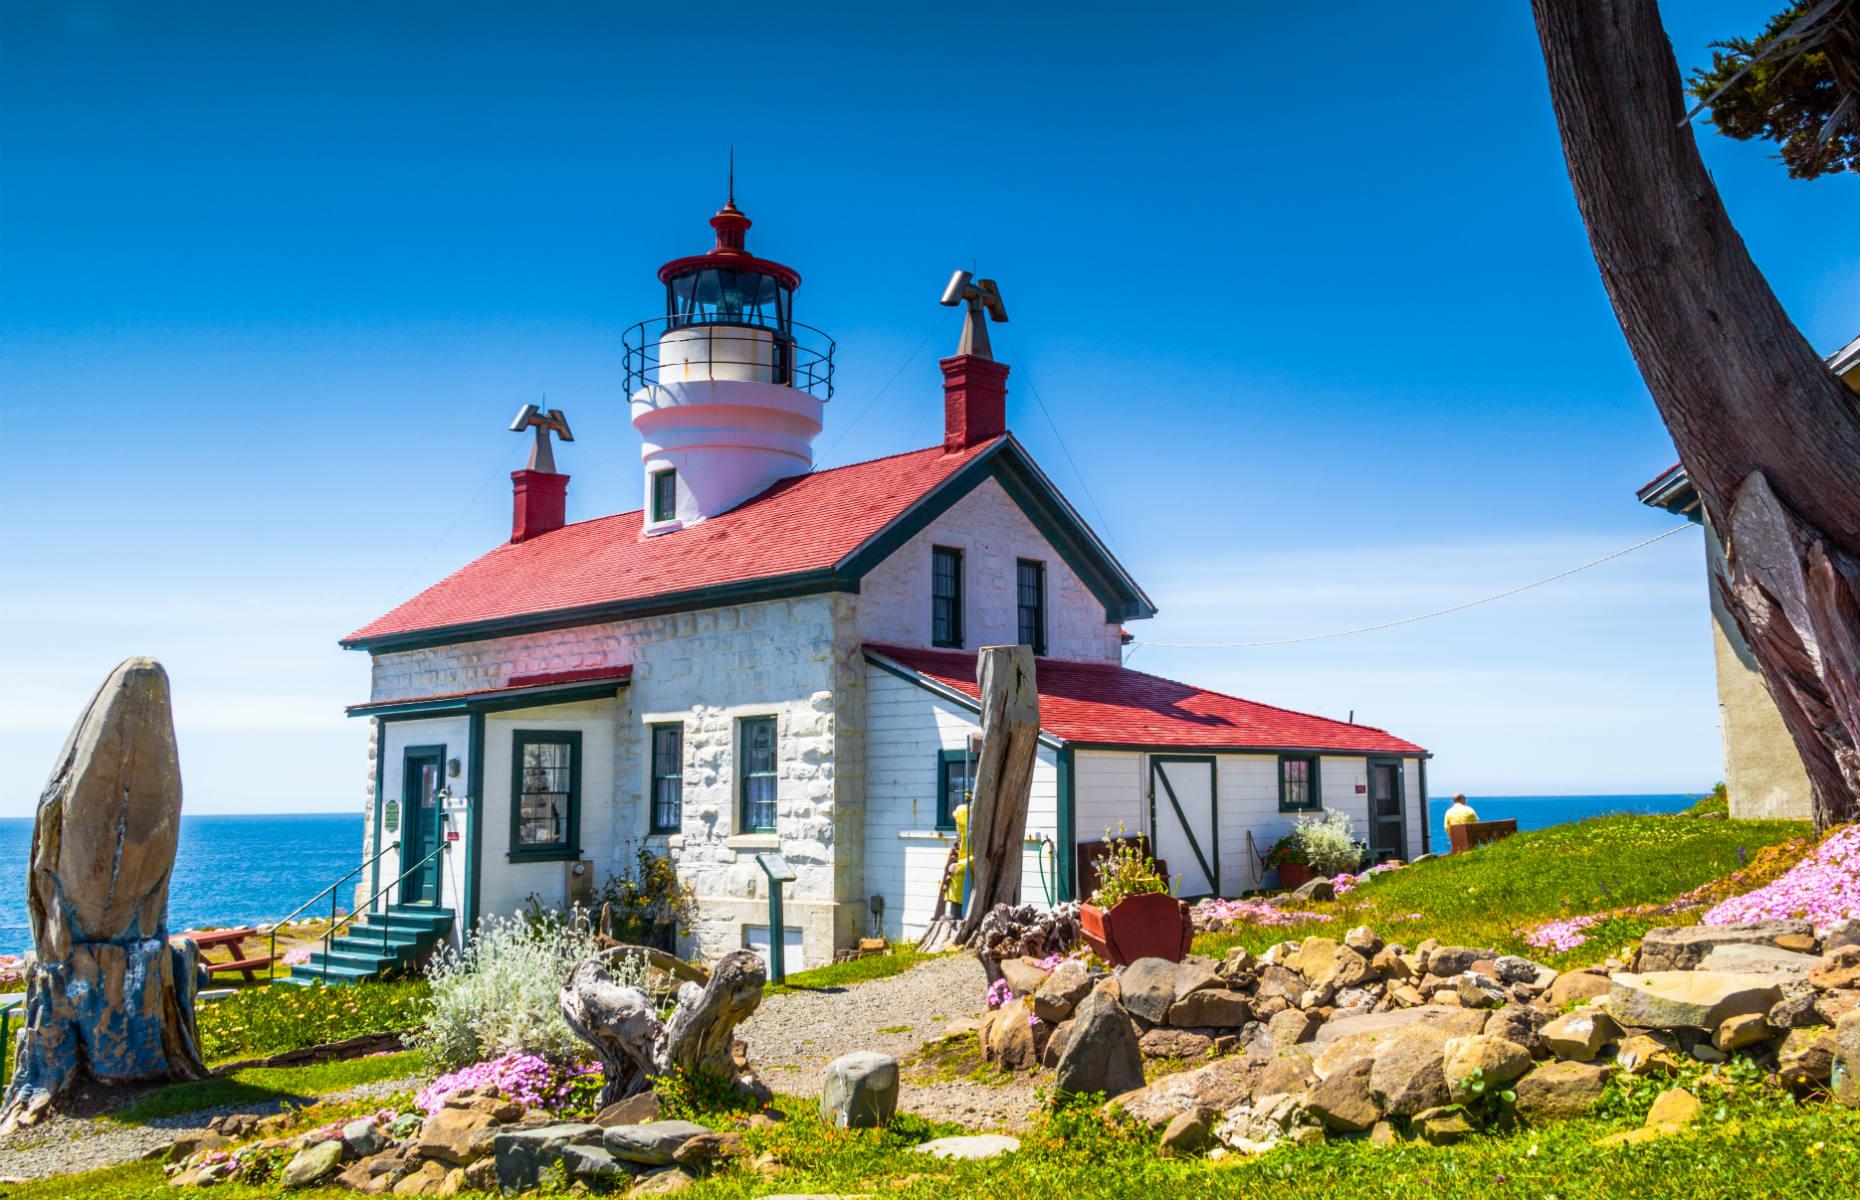 <p>Sitting on a small rocky outcrop just off the coast of Crescent City, Battery Point Lighthouse is only accessible at low tide. First lit in 1856, the light is still in operation today, while many of the original furnishings inside remain, giving a glimpse into the lives of former keepers and their families. </p>